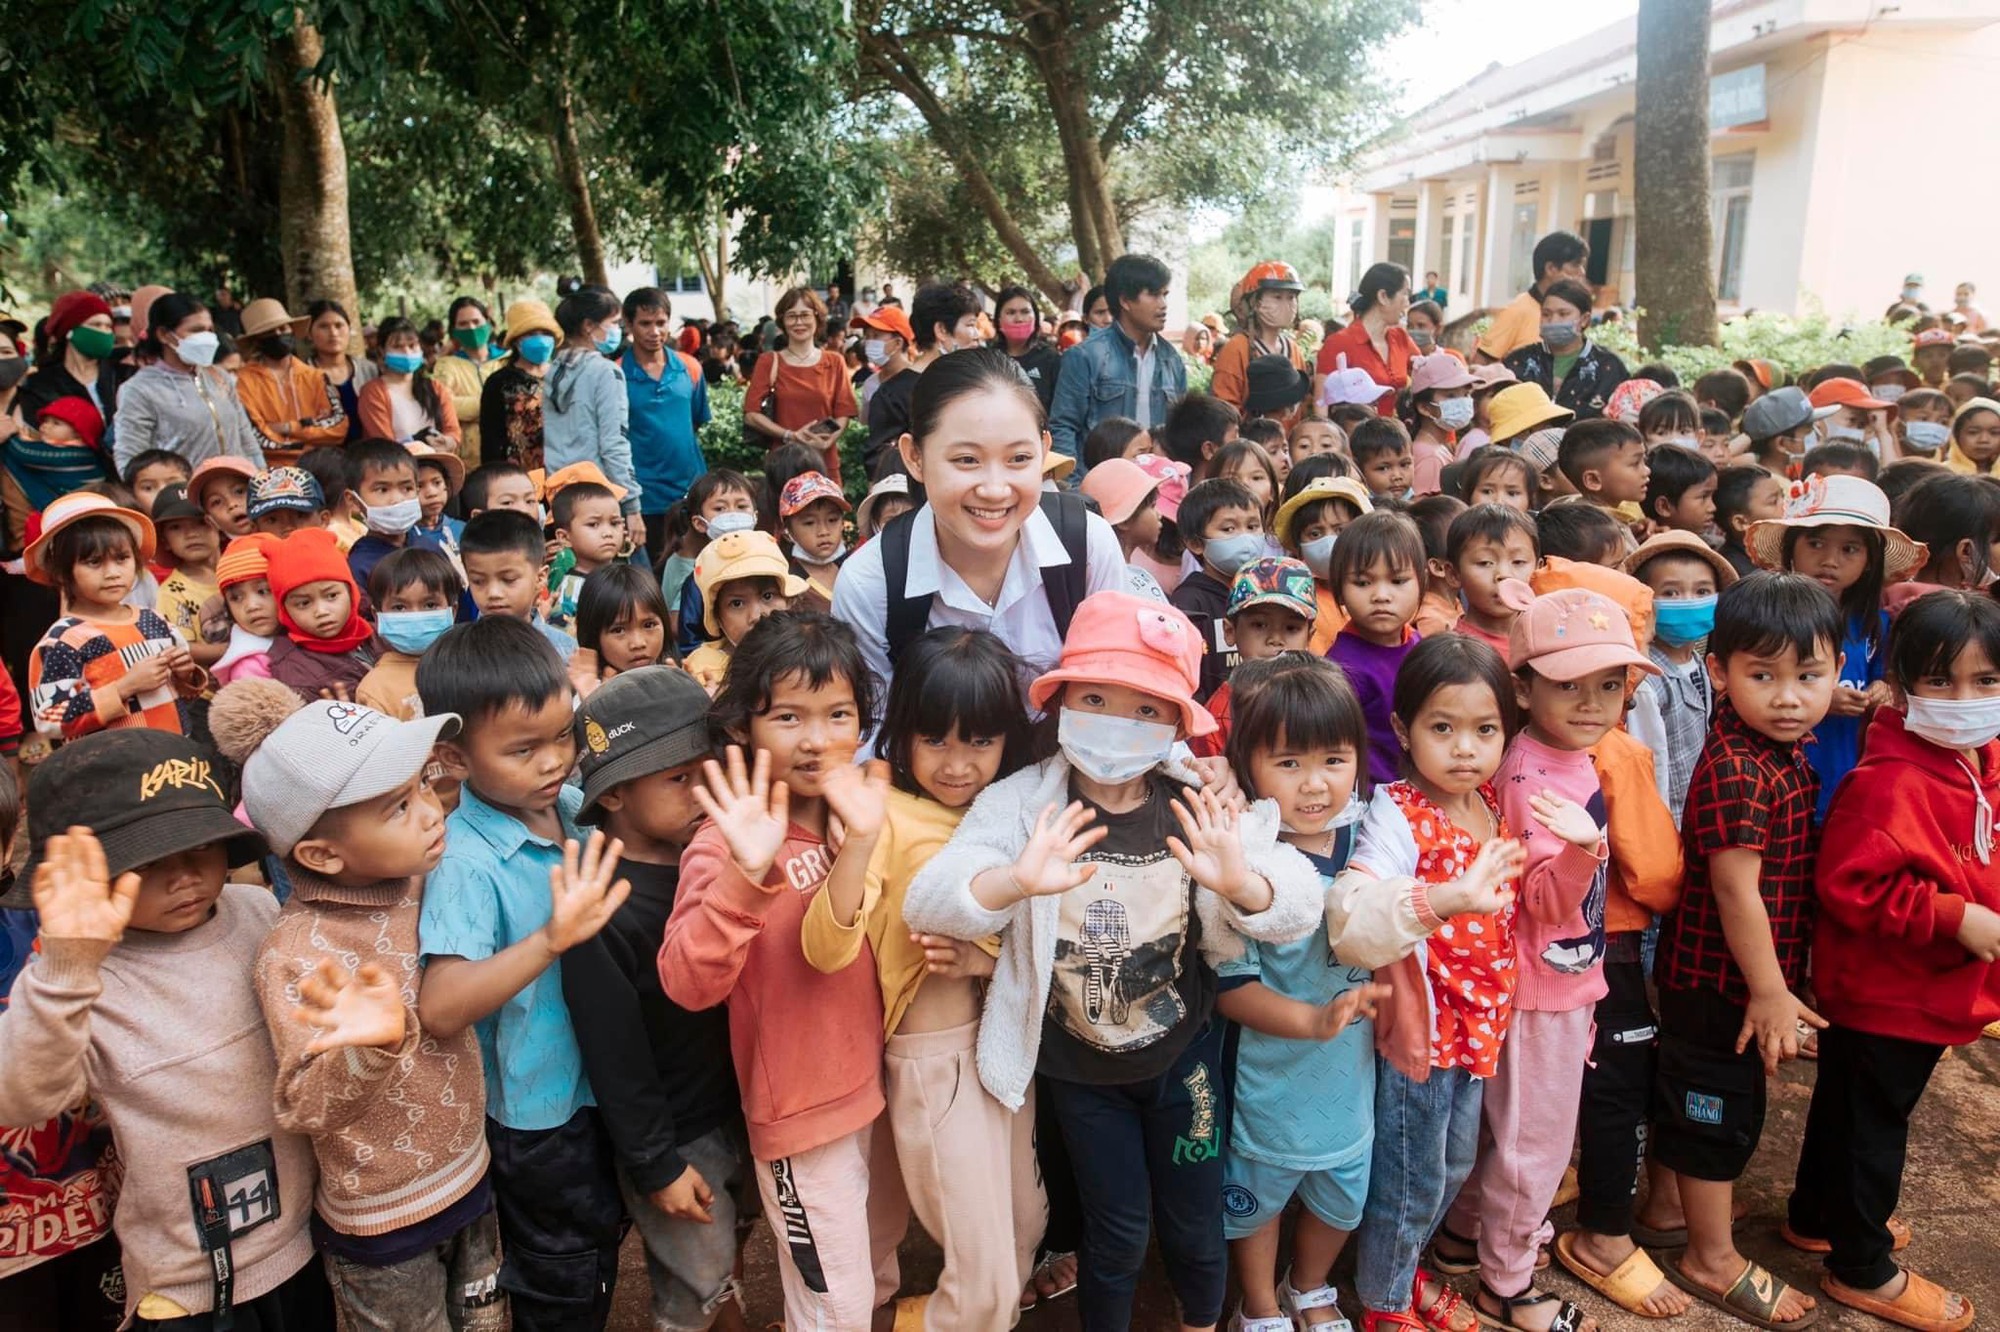 Gia Lai schoolgirl and her journey through the villages doing charity work - Photo 6.